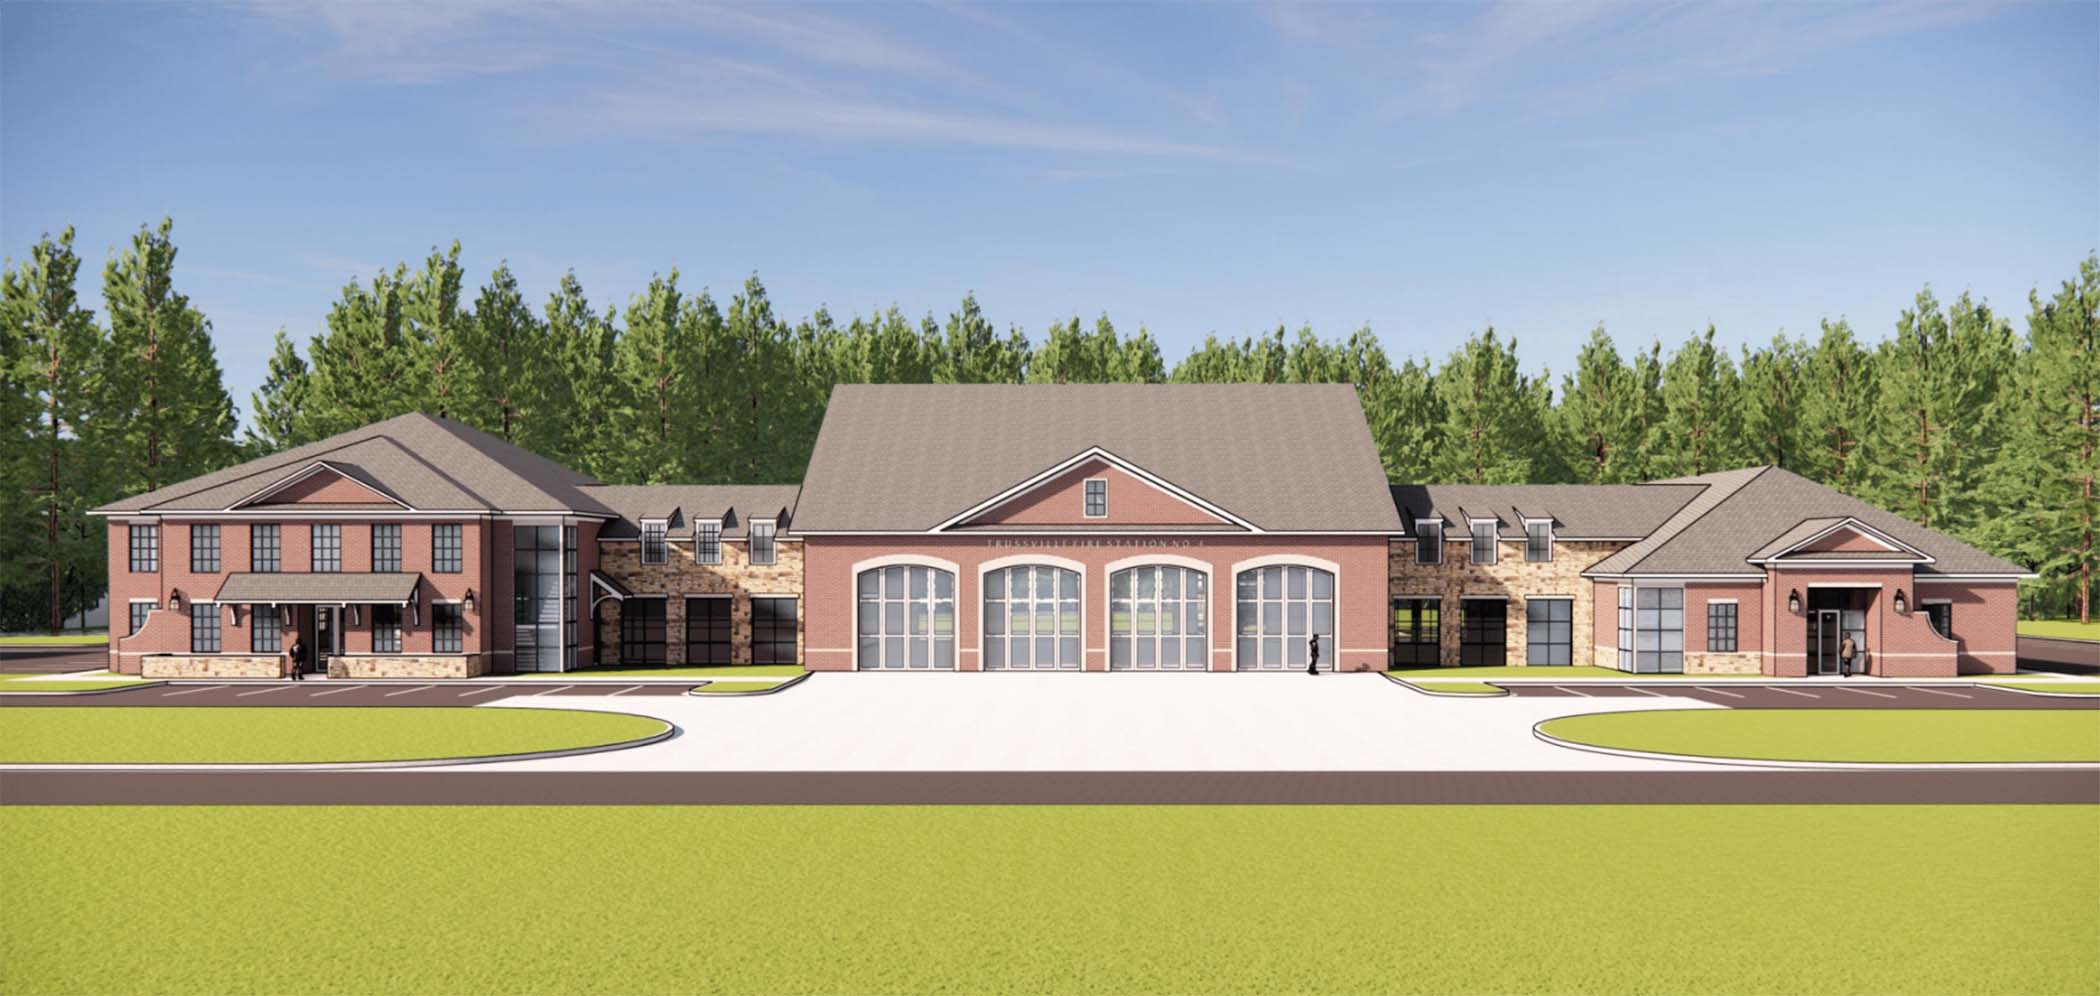 Trussville announced plans to build a new Fire Station No. 4